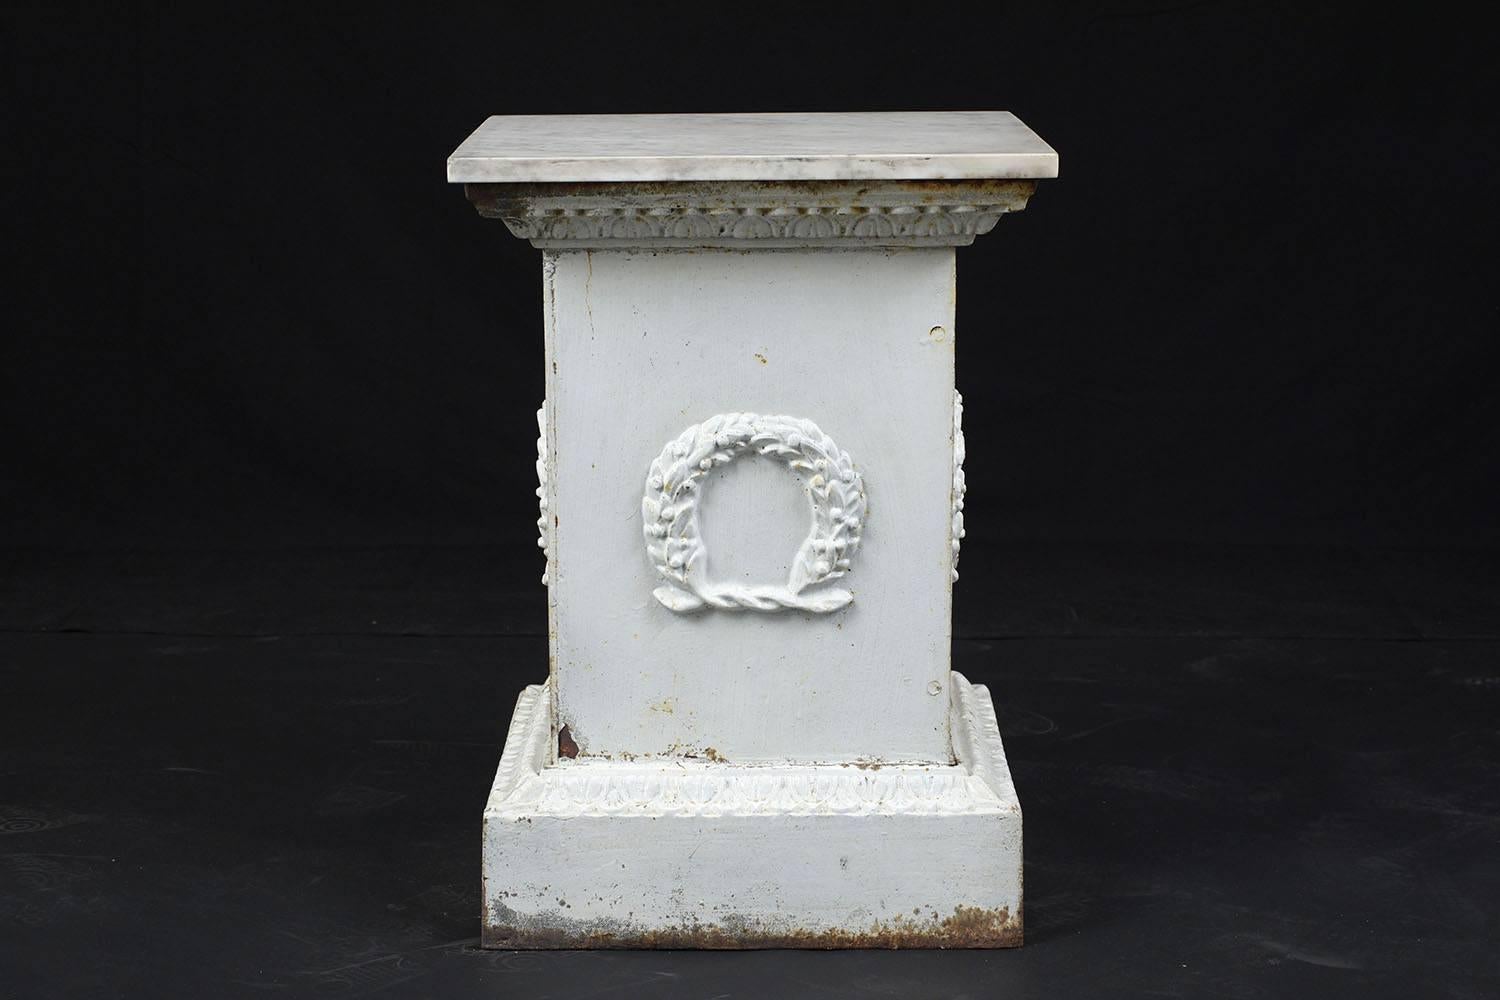 This 1900s neoclassical style pedestal is made of iron painted an off-white color with natural oxidization and rust accents. The pedestal is adorned with egg and drop bands along the top and bottom and a garland wreath on every side. The top of the